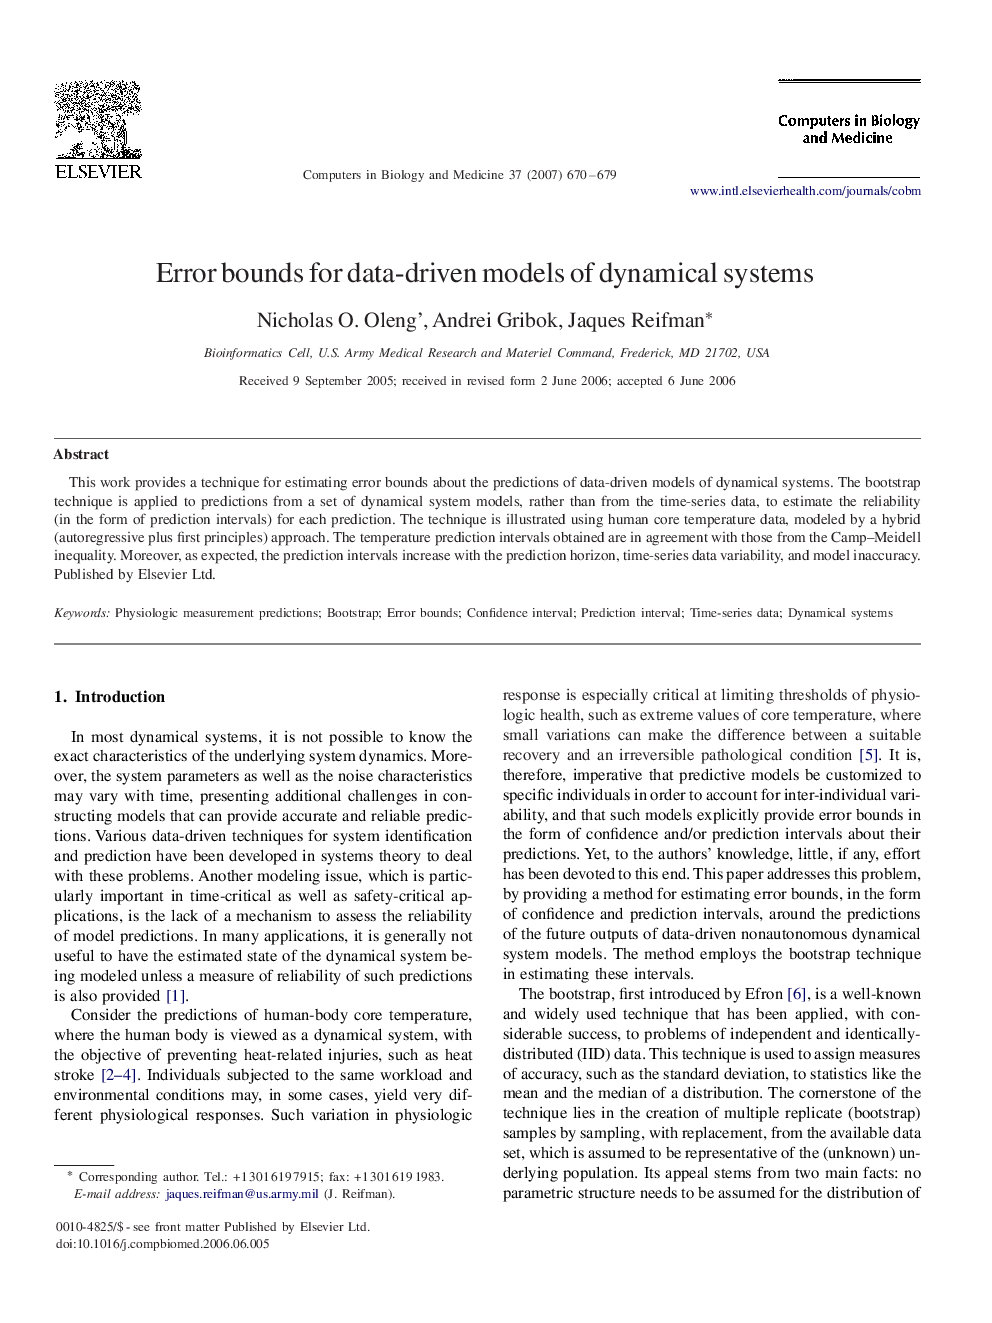 Error bounds for data-driven models of dynamical systems